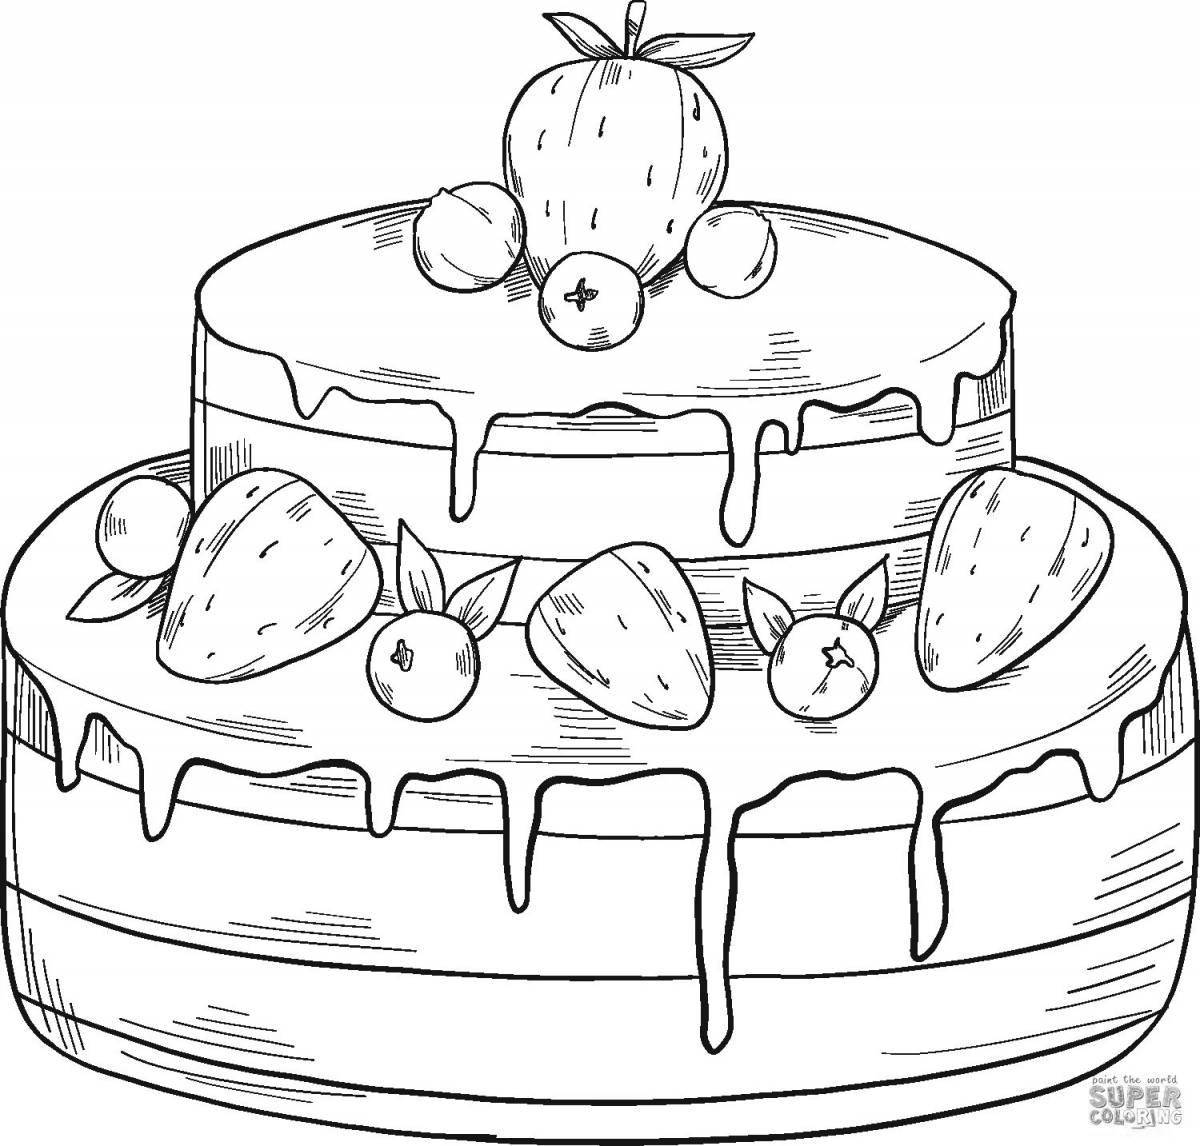 Moist chocolate cake coloring page